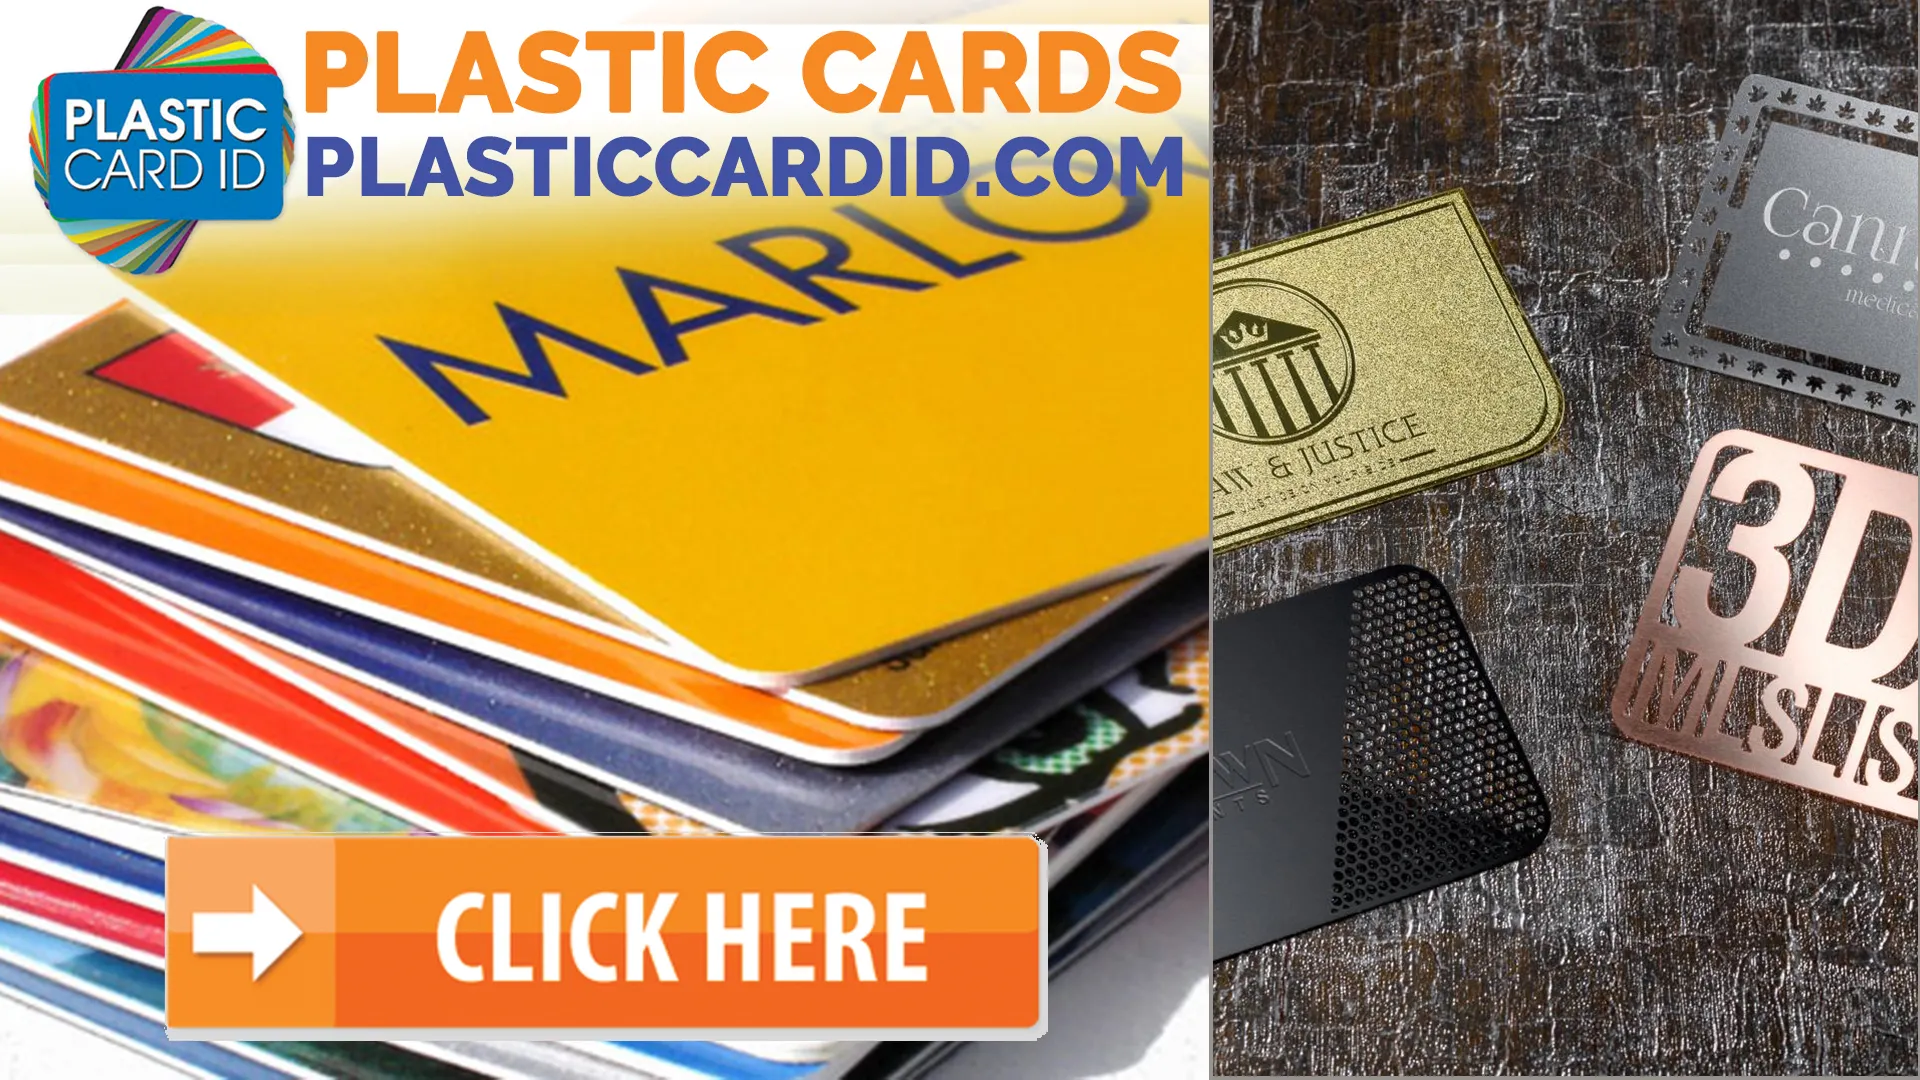 Meeting the Demand for Distinctive Plastic Cards